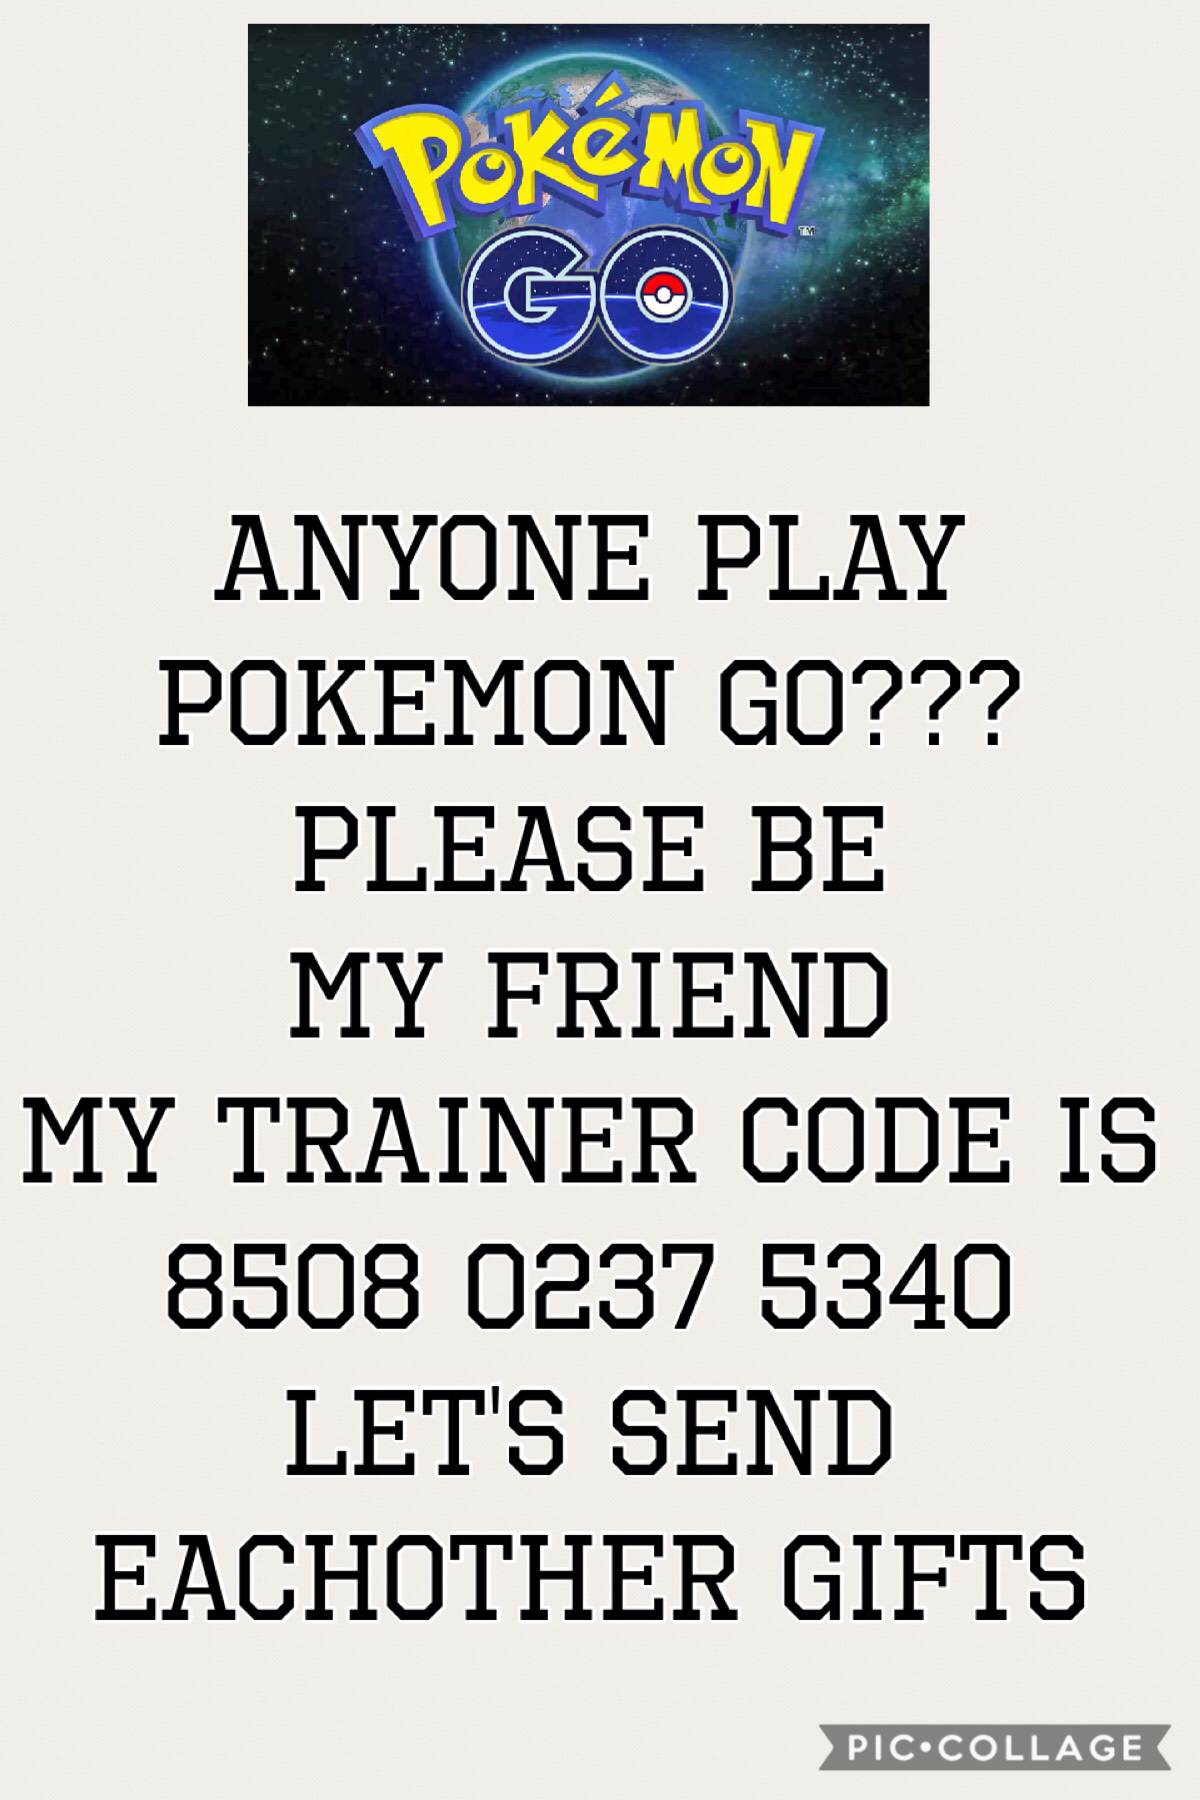 OR TELL ME IF FRIEND CODE IN THE COMMENTS